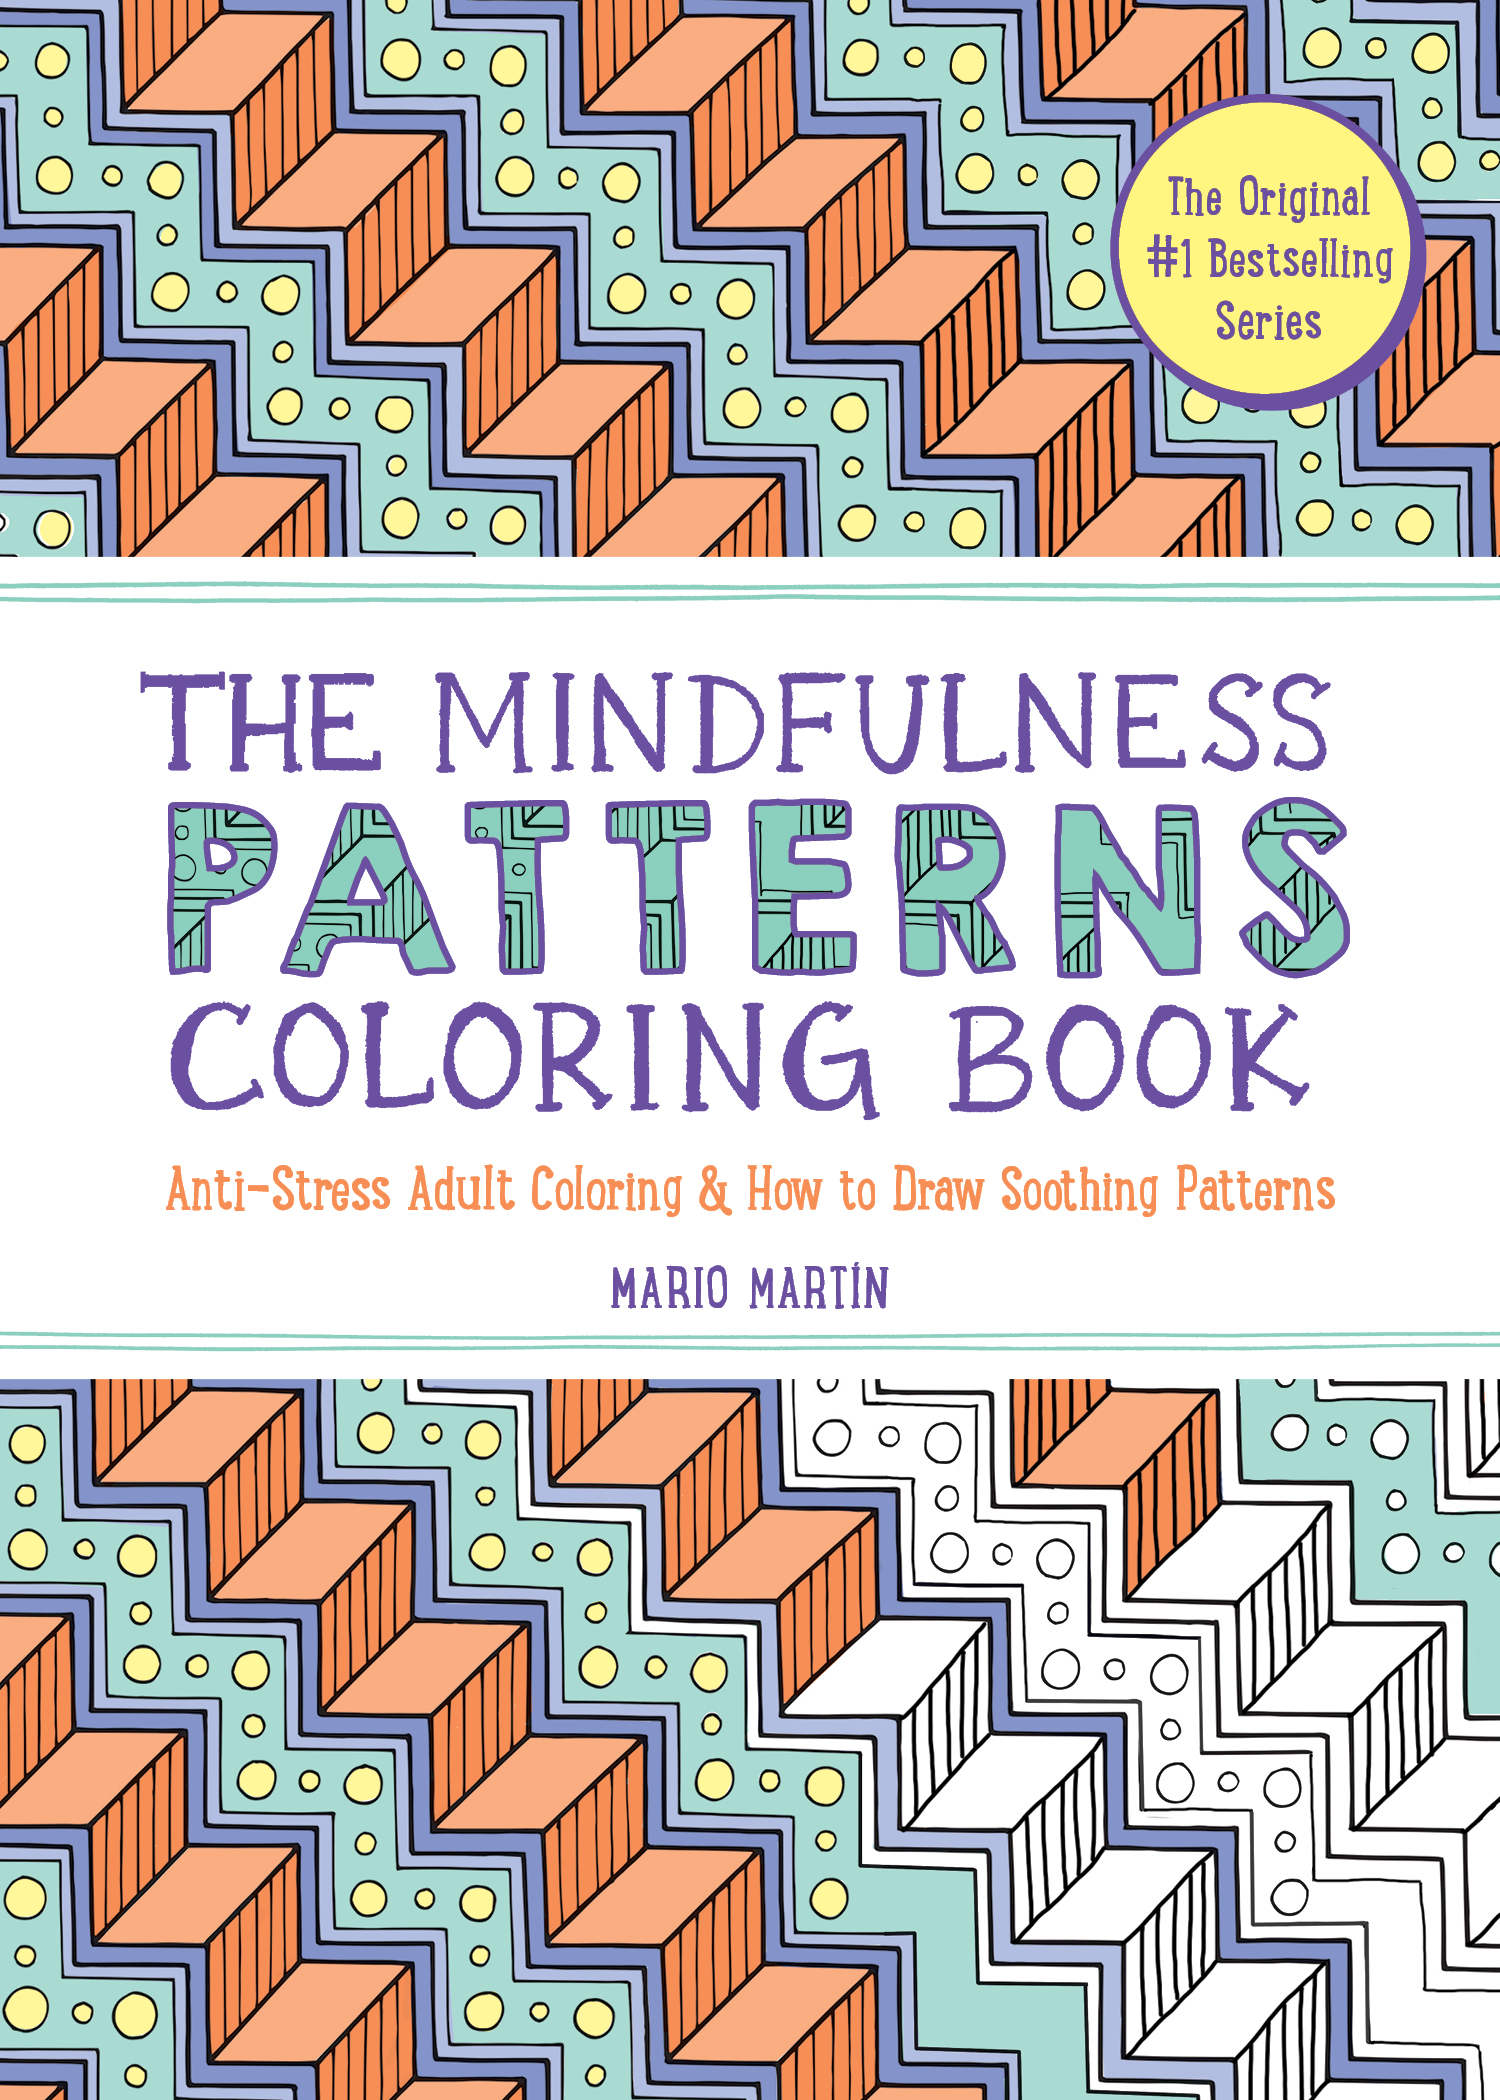 Geometric Patterns and Designs: Geometric Pattern Coloring Book for Adults for Stress Relief (Mindful Adult Coloring Books for Relaxation)